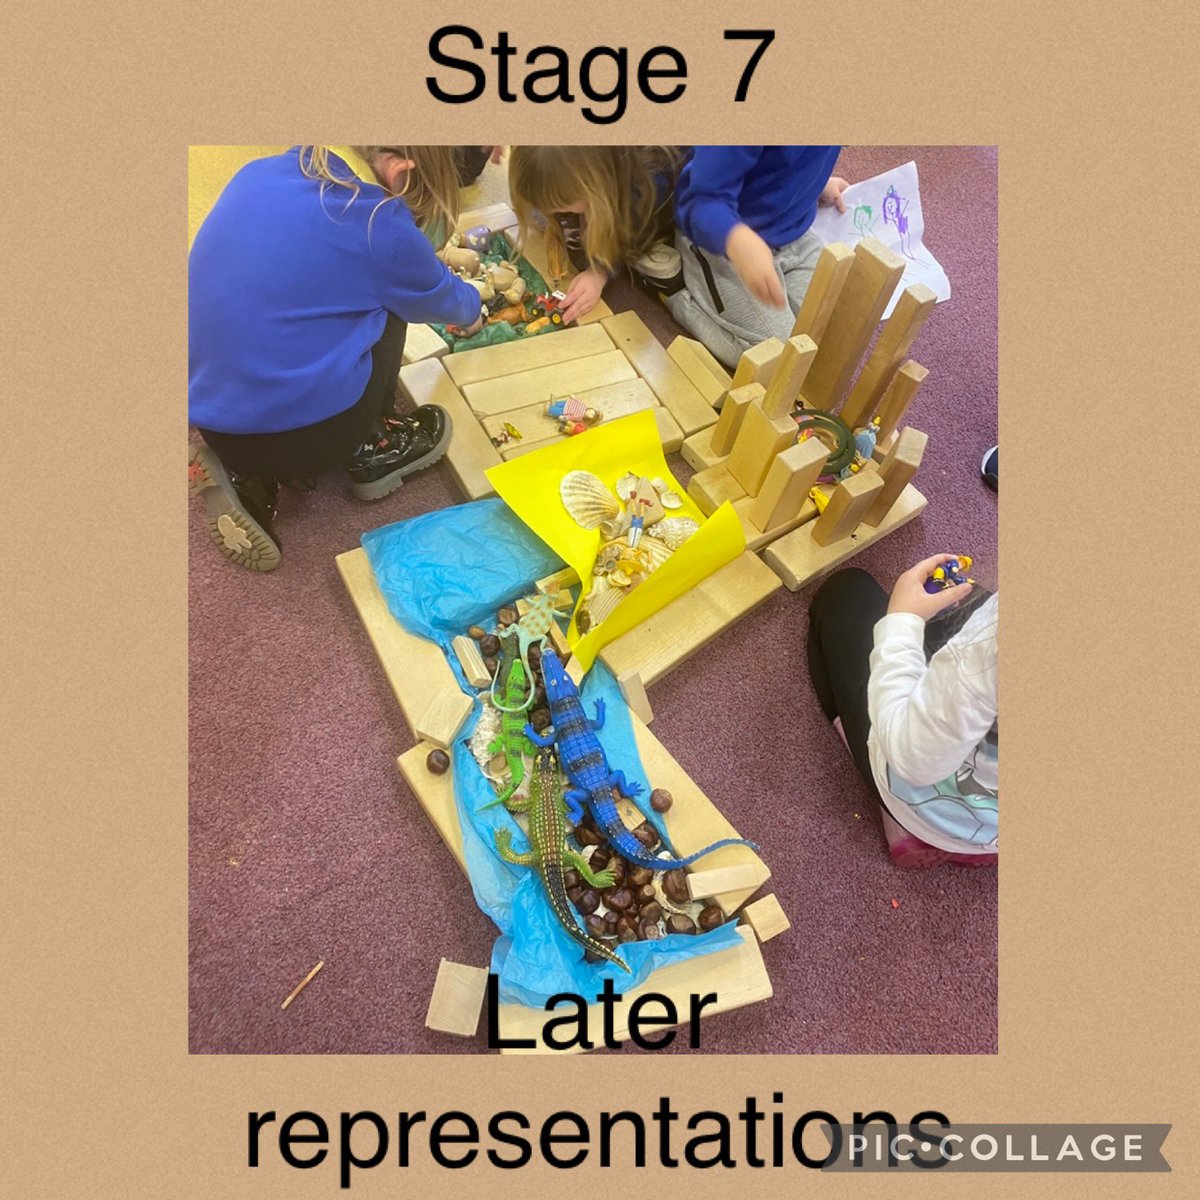 Our #blockplay is developing well in our class. Given space, time and an enabling adult! @FroebelTrust @EAS_EarlyYears @BrimbleGaynor